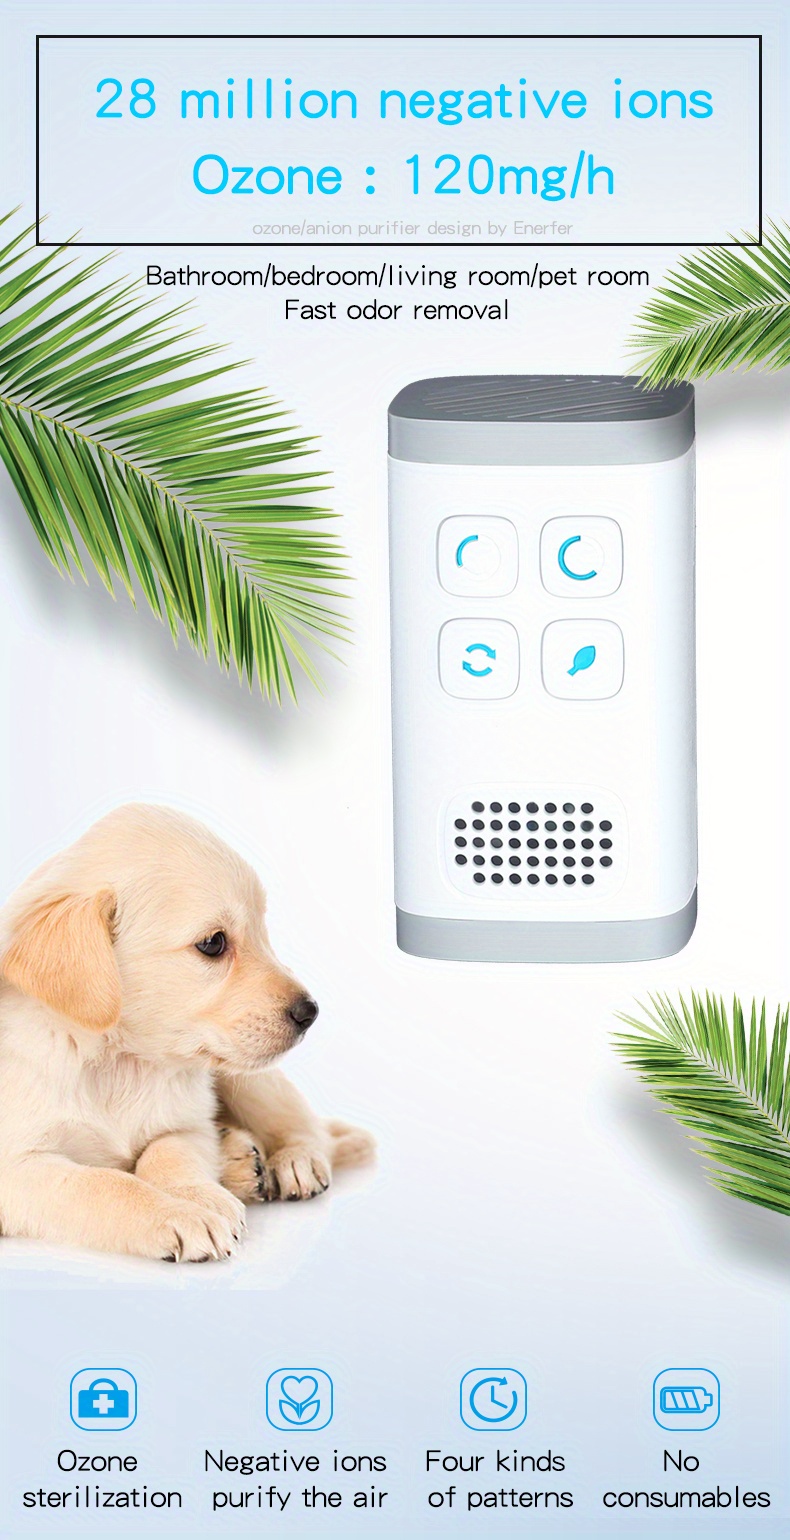 air purifier negative ion ozone cat house pet sterilization odor removal disinfection machine cat litter purifier odor remover details 0